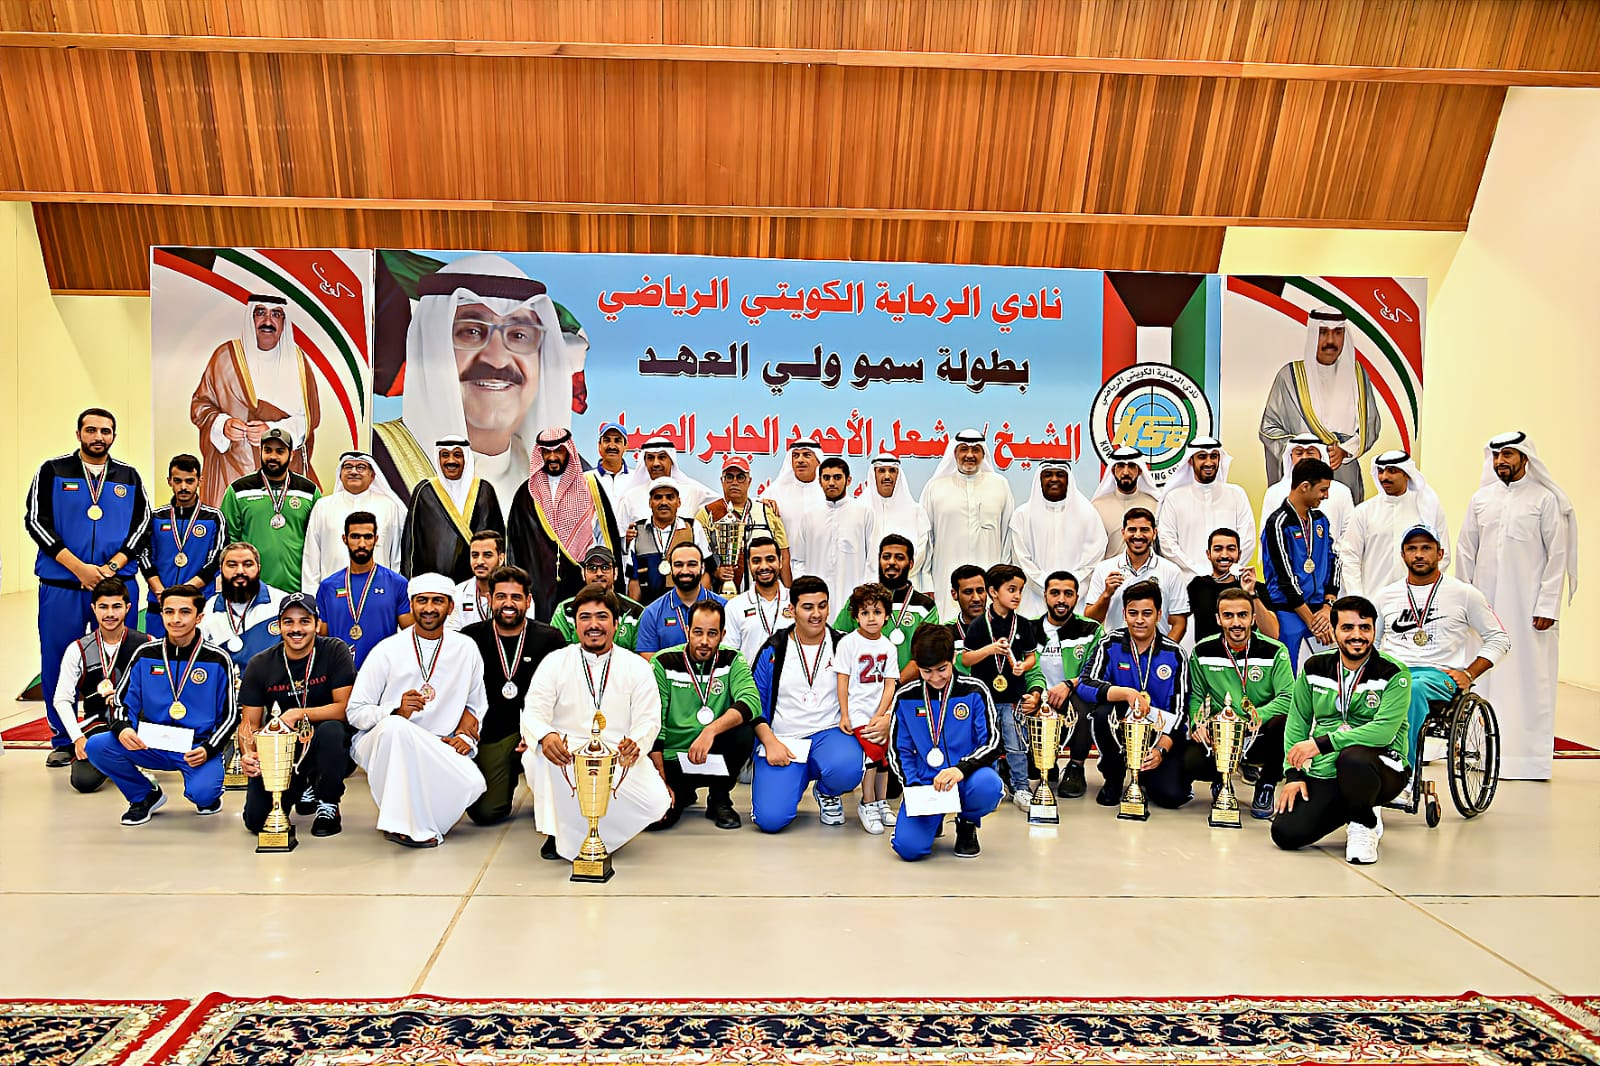 KUWAIT: A group photo of the winners in the men’s and juniors’ competitions with the tournament’s organizers.n